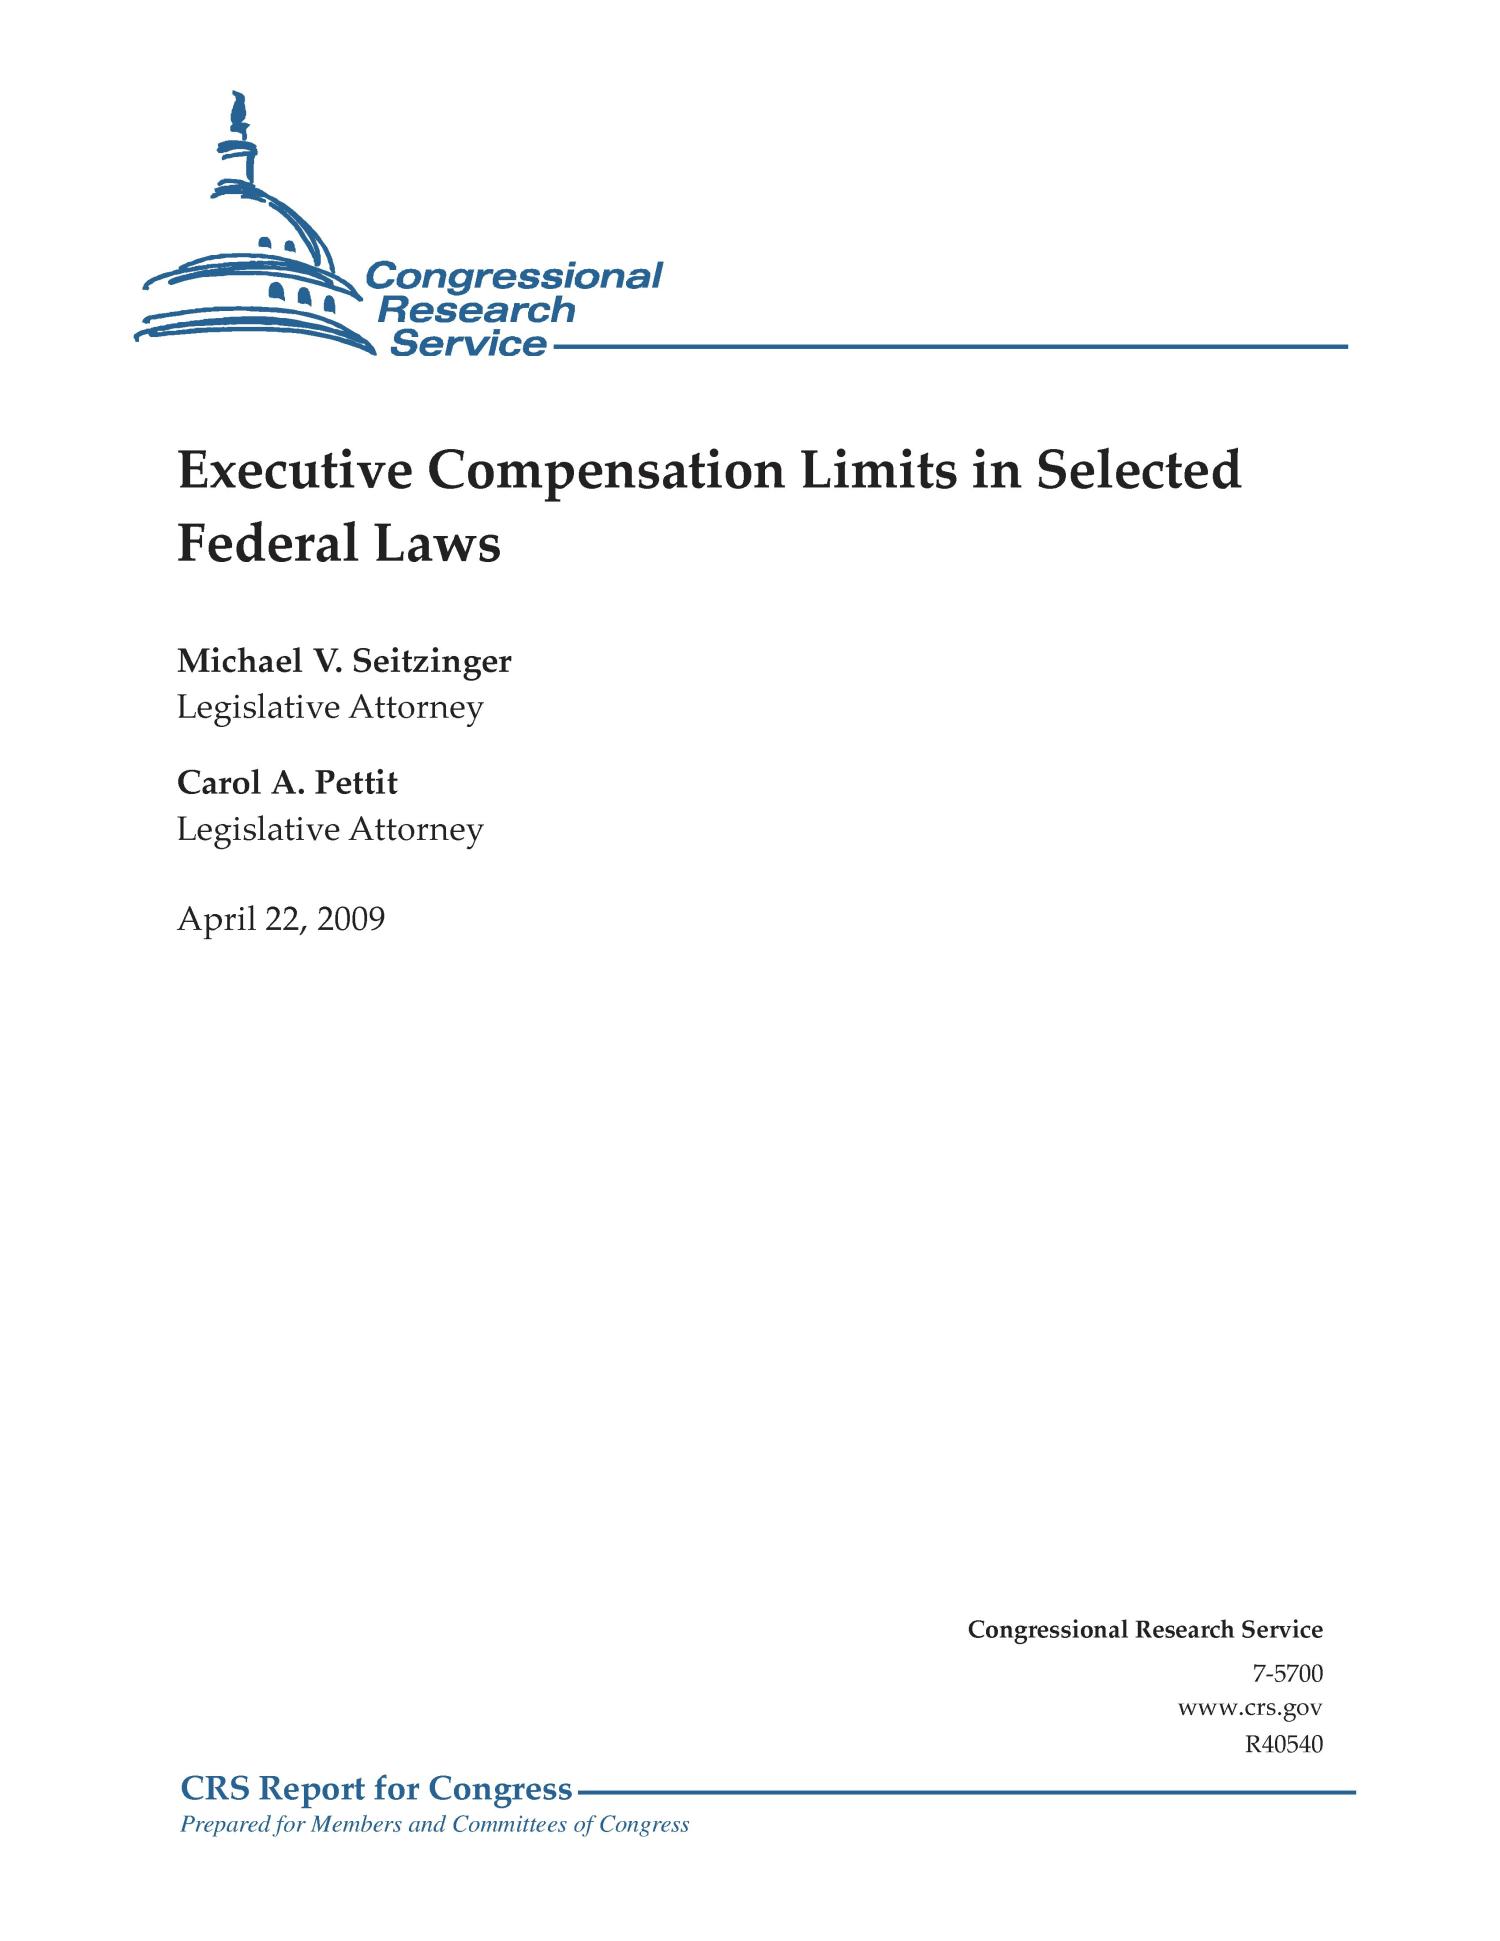 Executive Compensation Limits in Selected Federal Laws UNT Digital